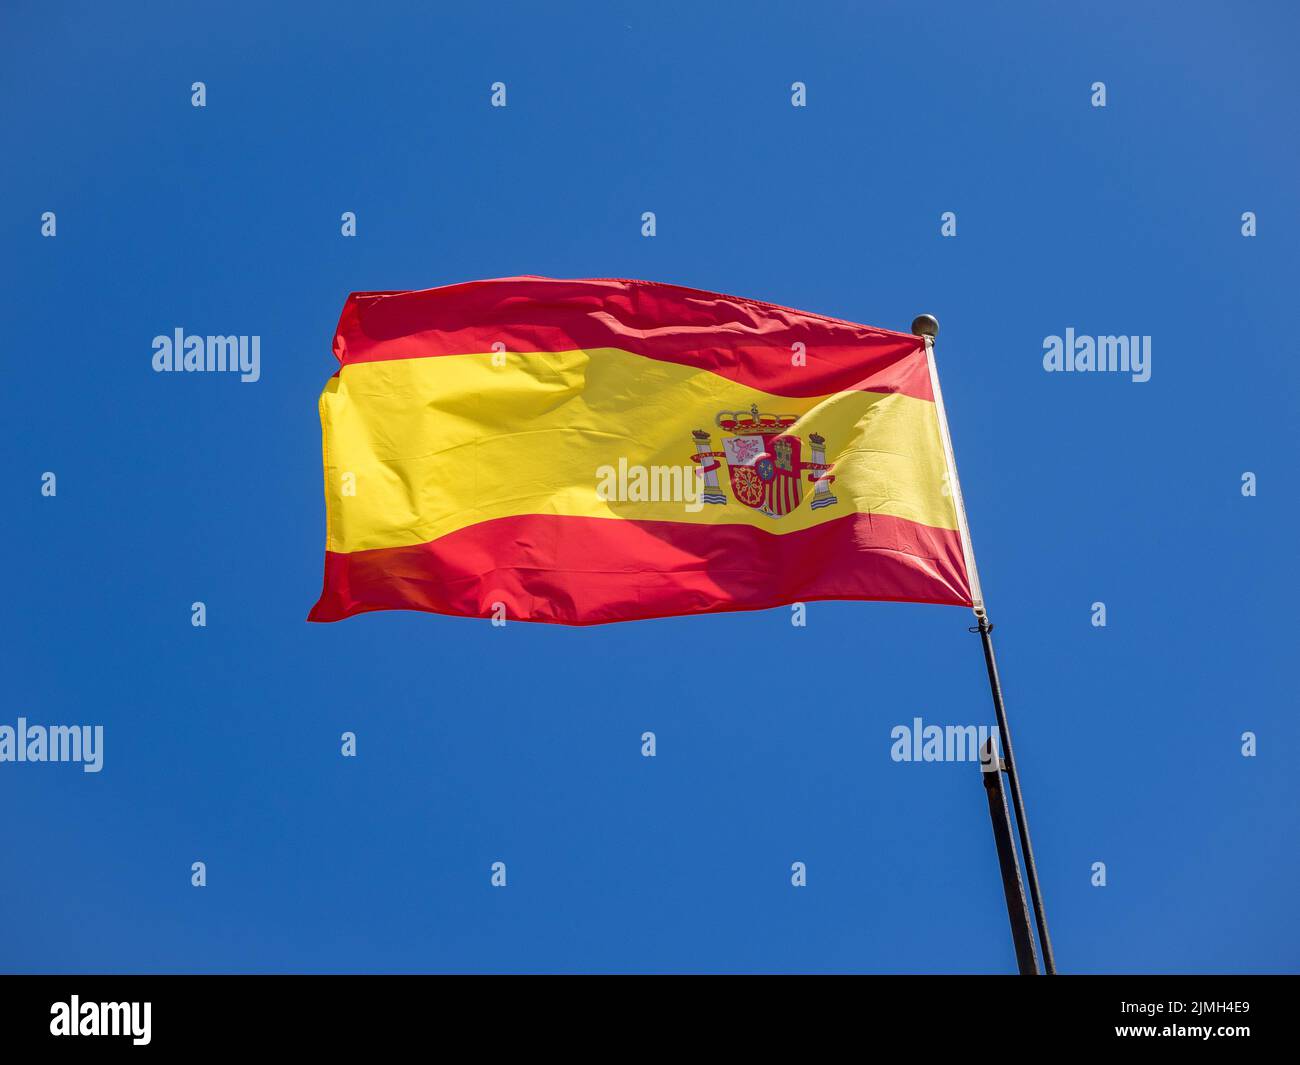 MARBELLA, ANDALUCIA/SPAIN - MAY 4 : Spanish flag flying in Marbella Spain on May 4, 2014 Stock Photo